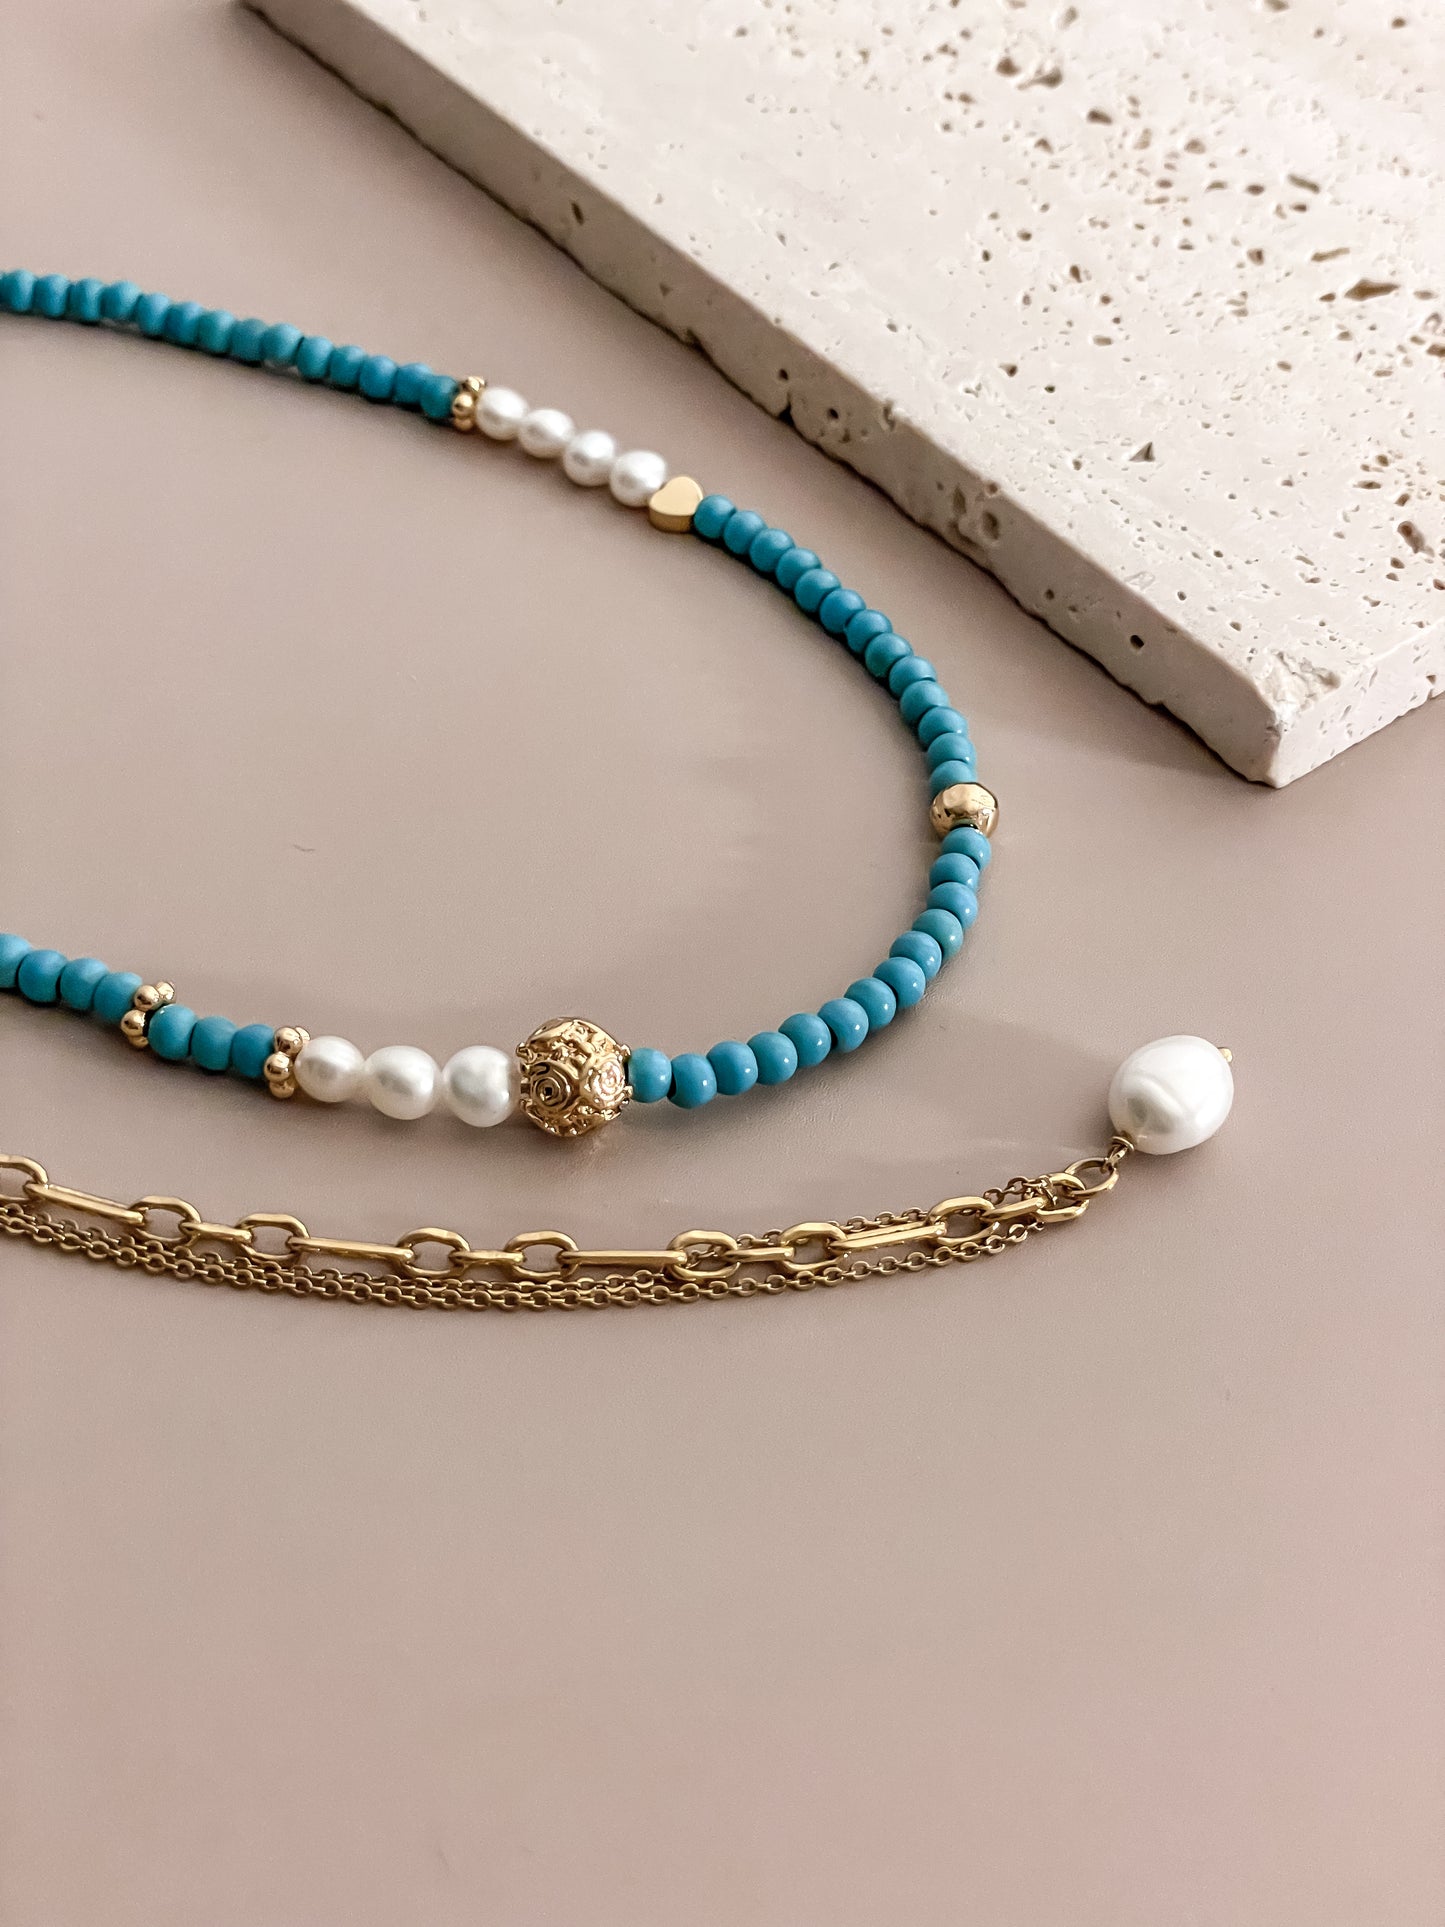 Turquoise Beaded Necklace w/ Pearl